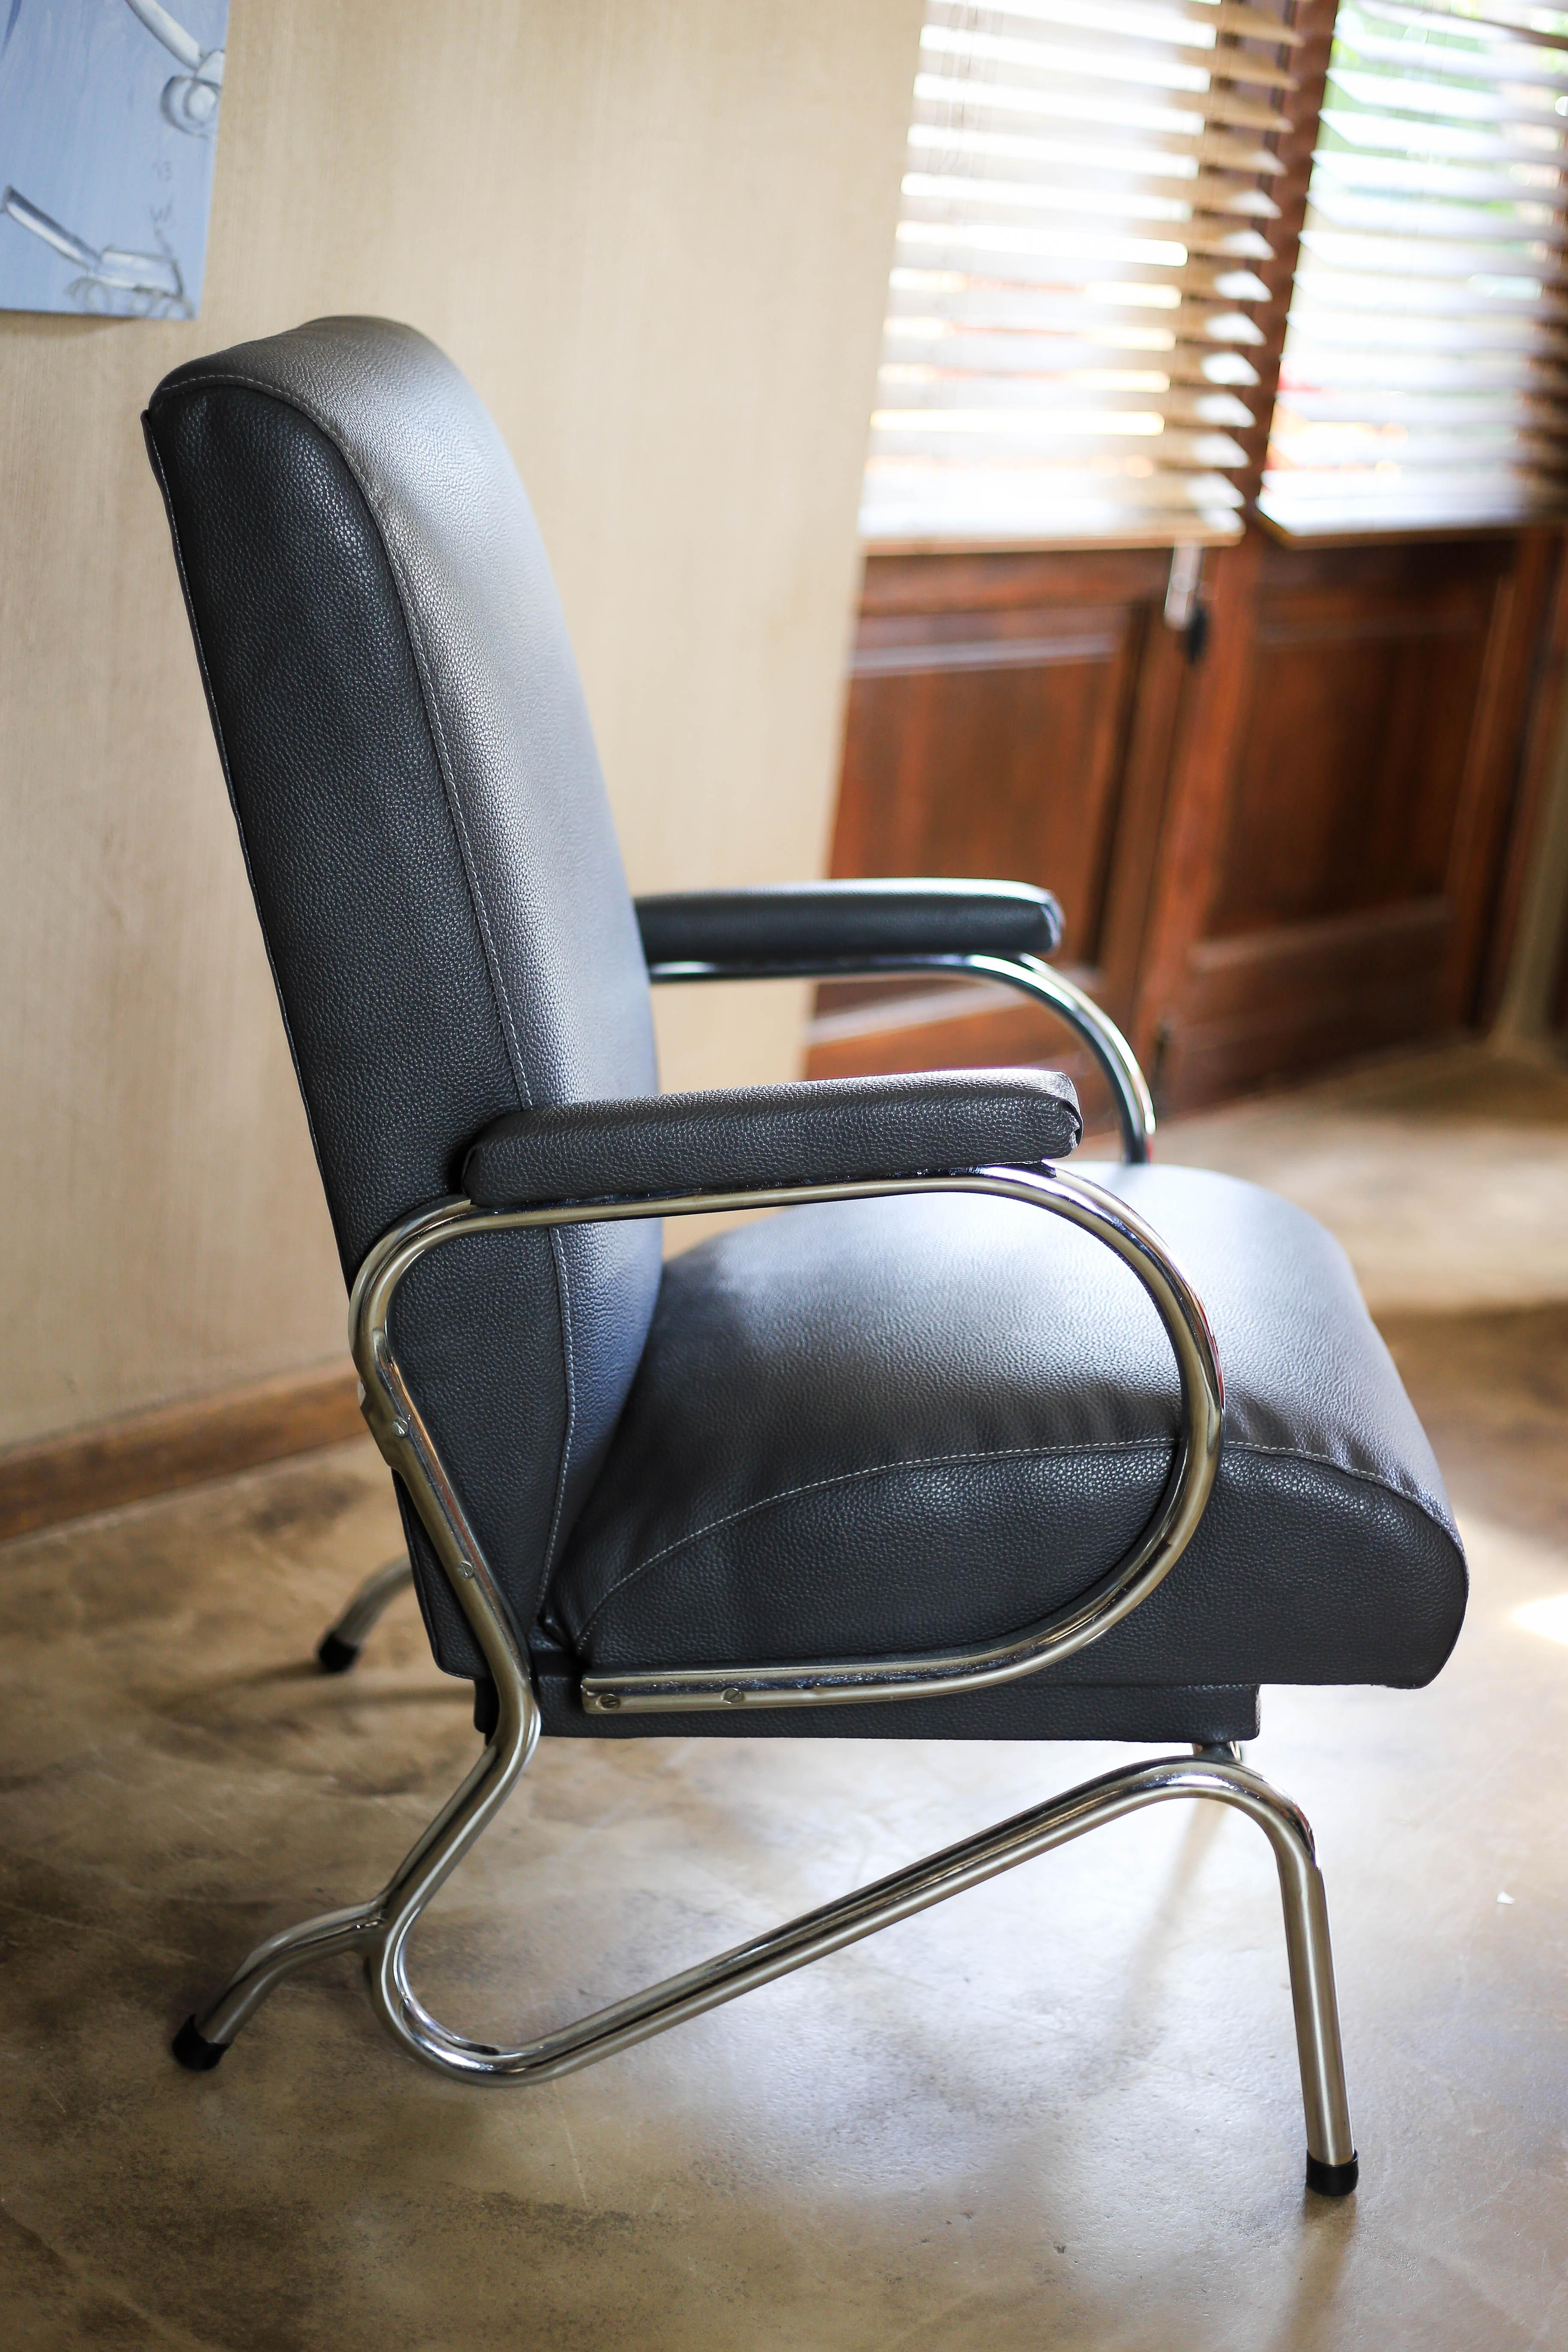 A Bauhaus, chromed tubular steel and faux leather armchair from the 1930s. The frame has been languishing in a storeroom in die South African Boland-province for decades until we found and refurbished it. The frame is re-chromed and the chair is